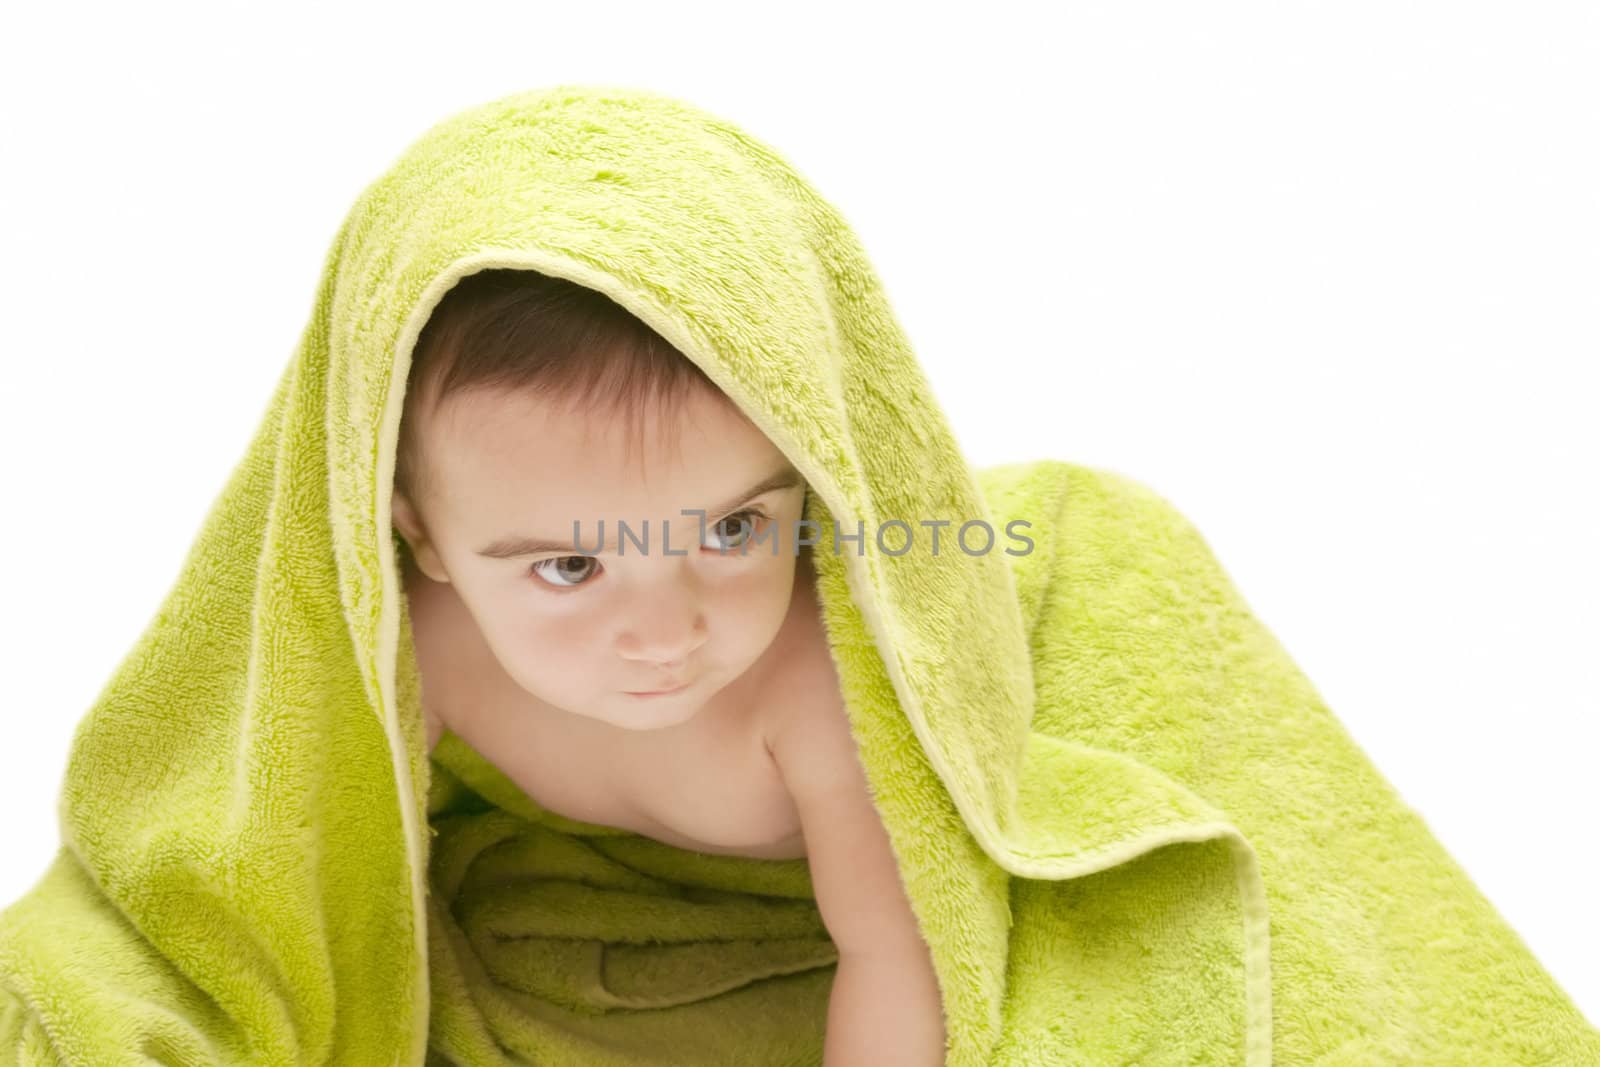 beautiful baby with a towel over your head
